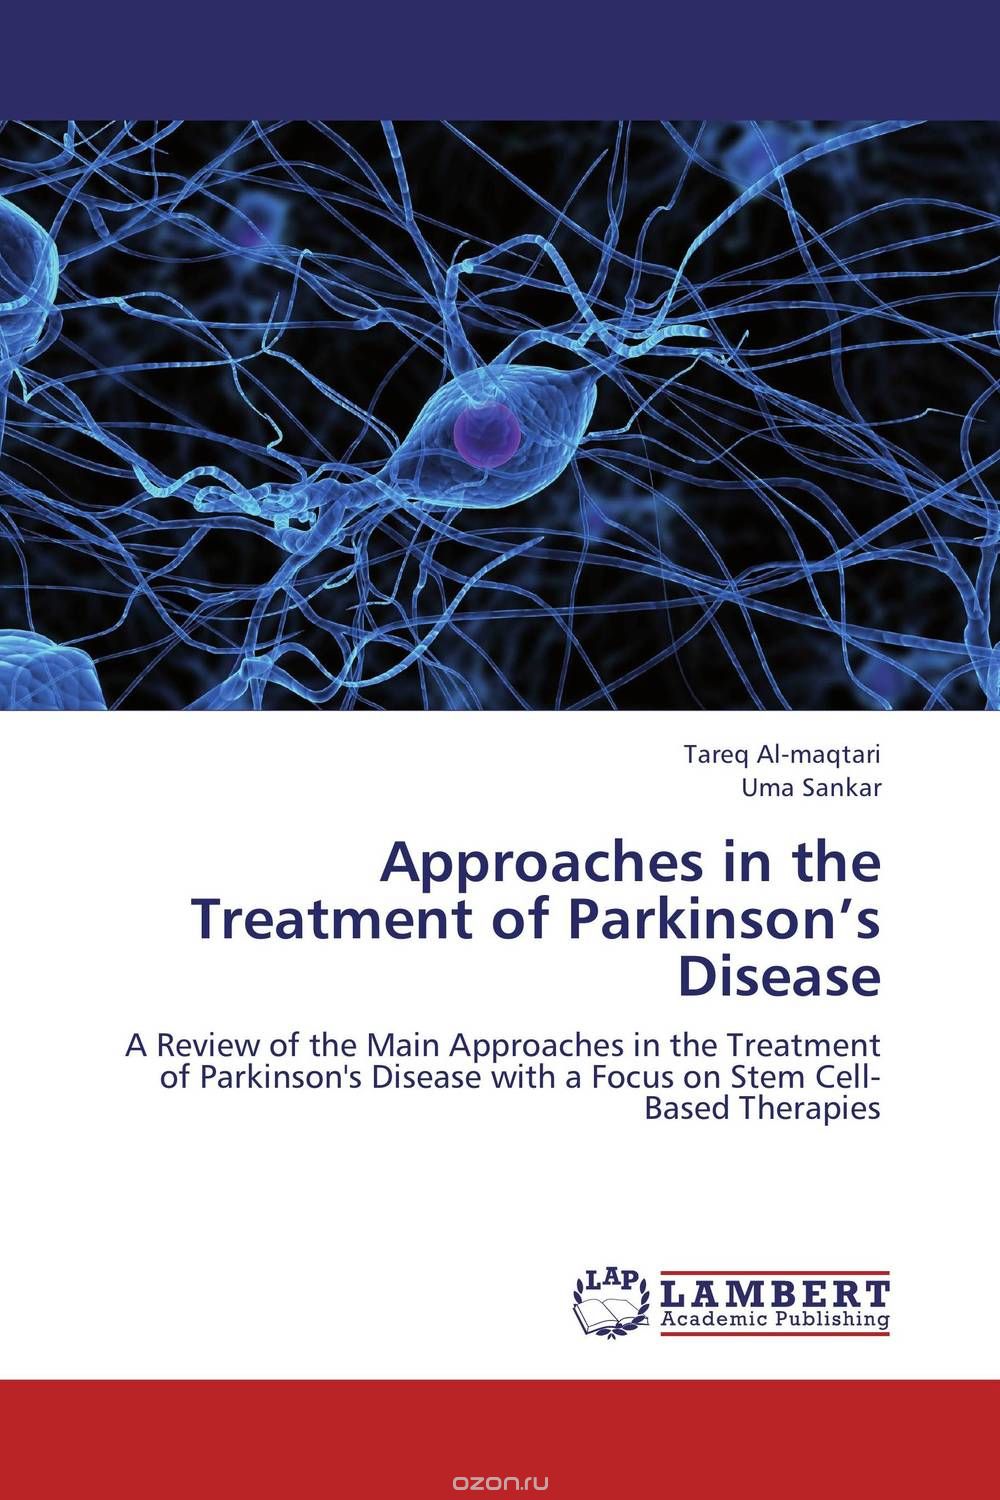 Approaches in the Treatment of Parkinson’s Disease